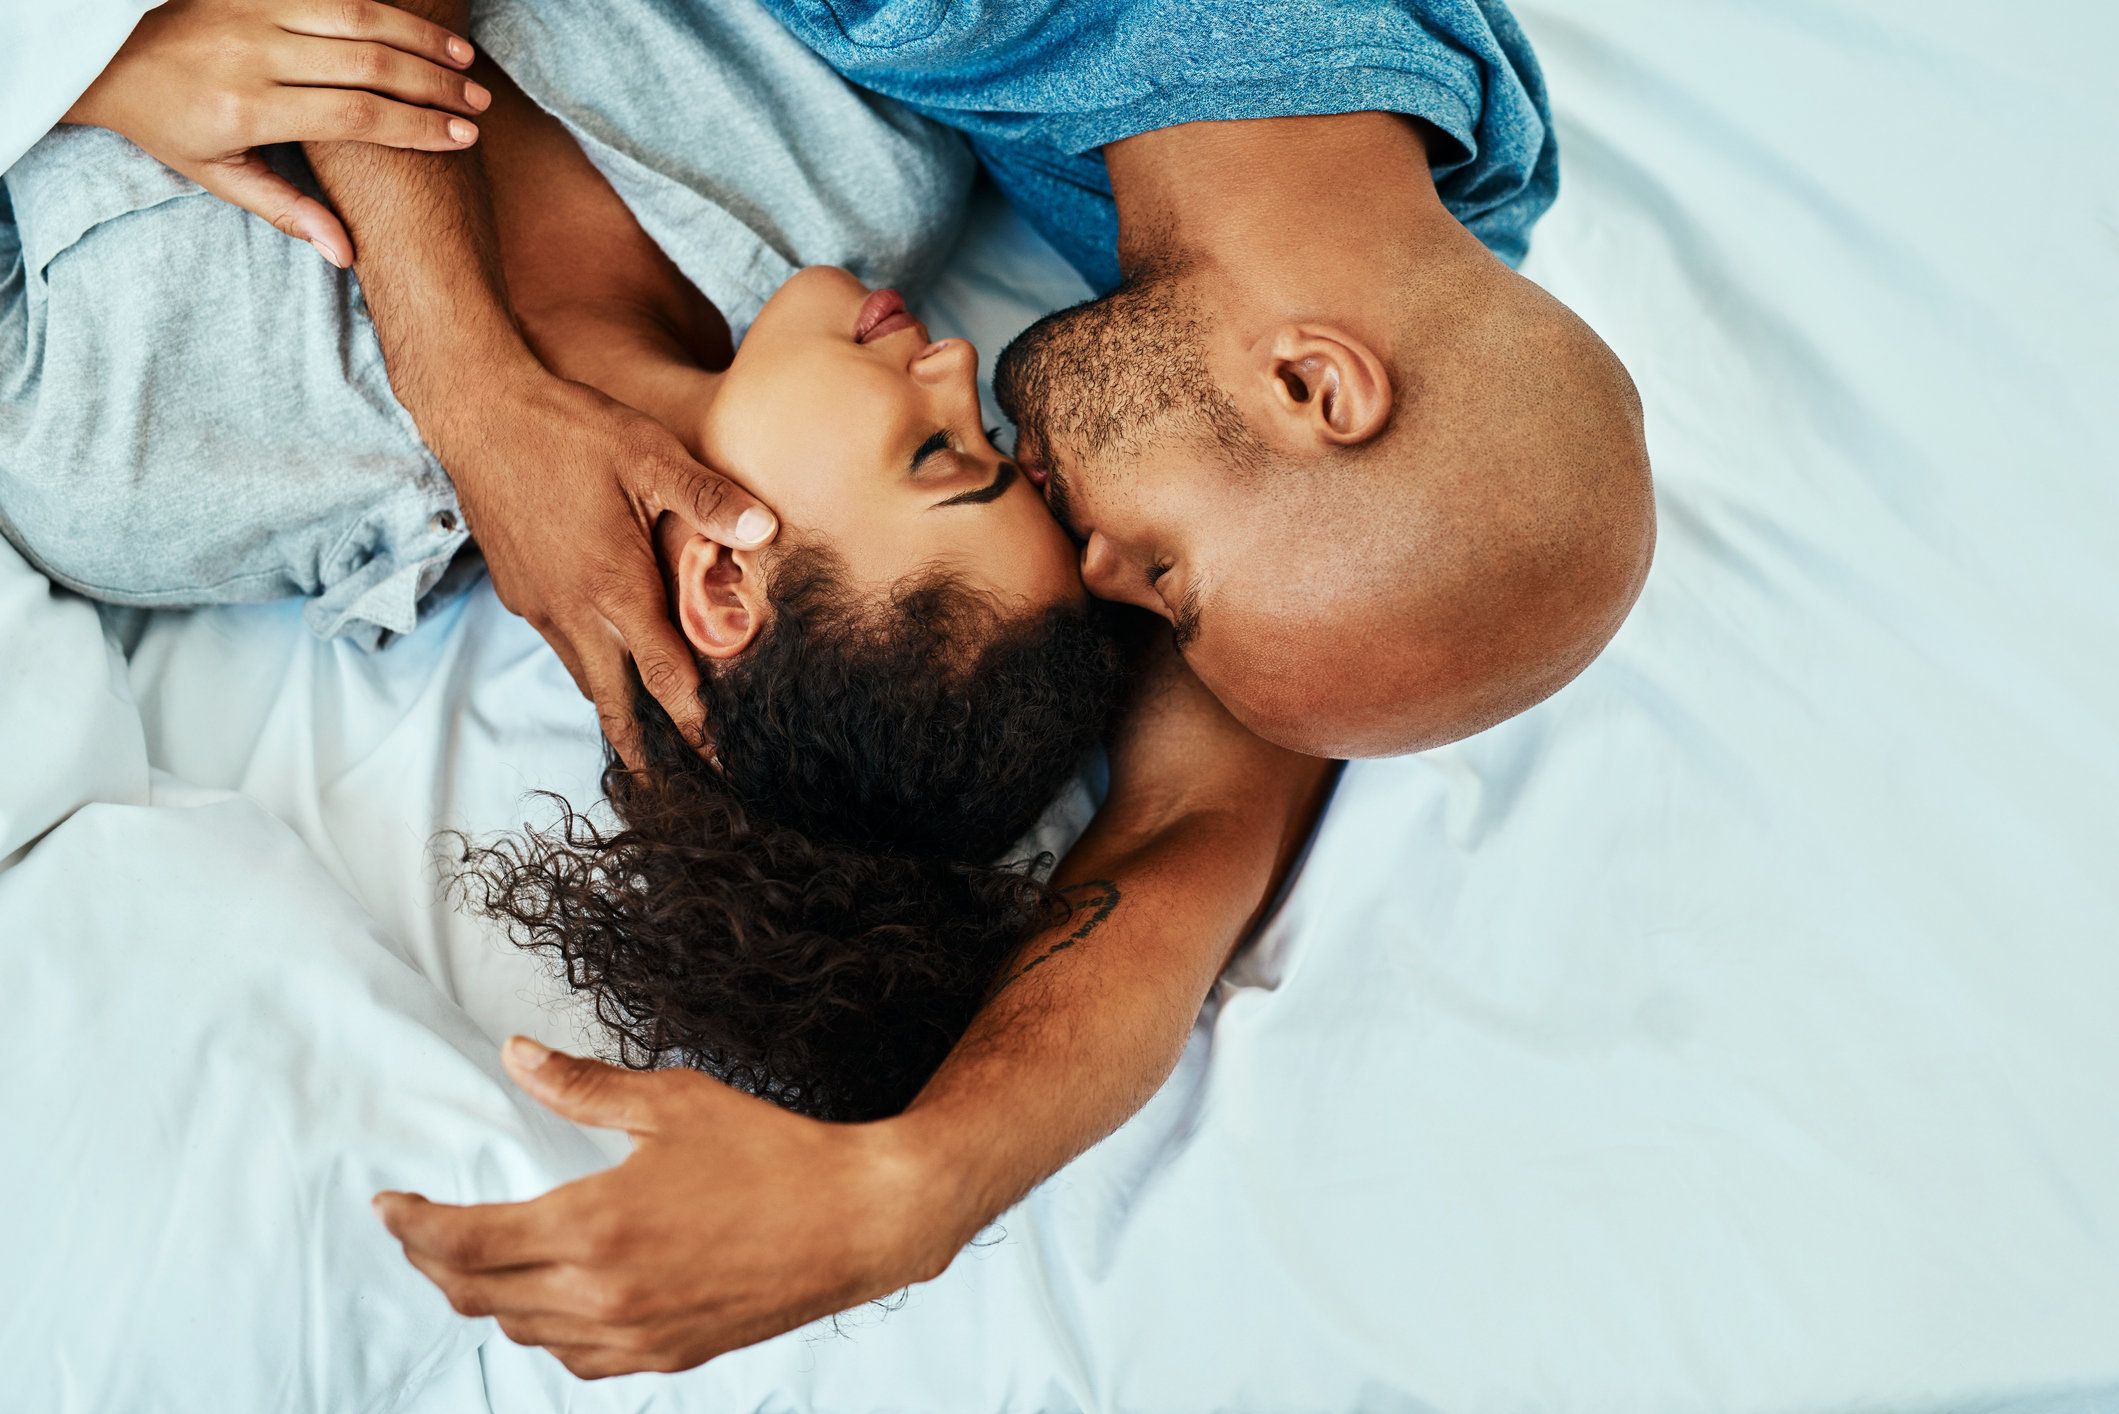 10 Married Couples Share The Keys To Their Totally Off-The-Chain Sex Life image